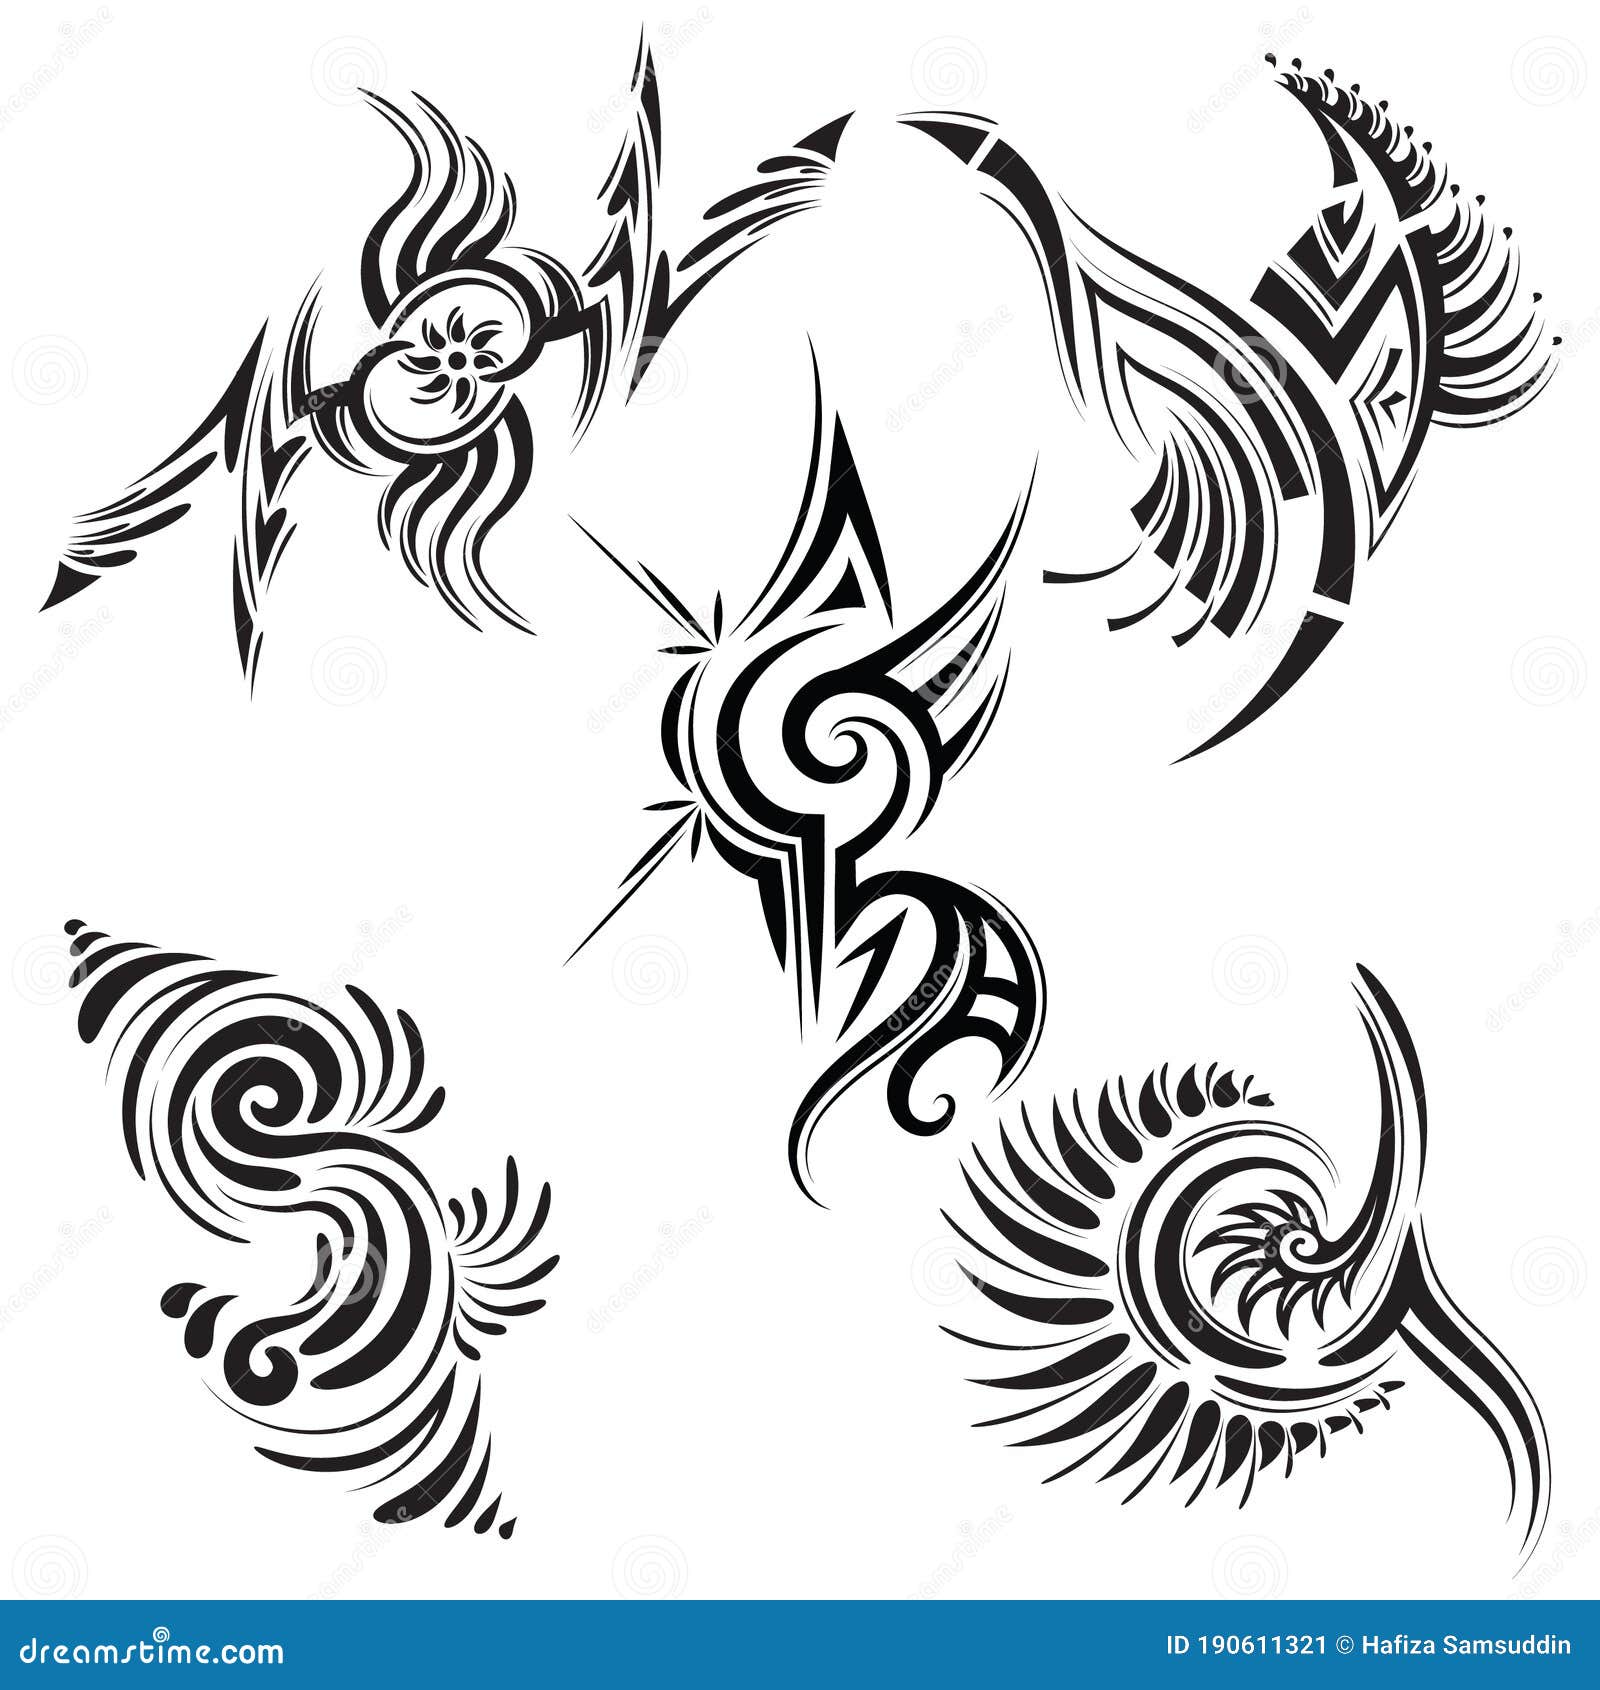 Collection of Various Tattoo Designs. Vector Illustration Decorative Design  Stock Vector - Illustration of variety, artistic: 190611321